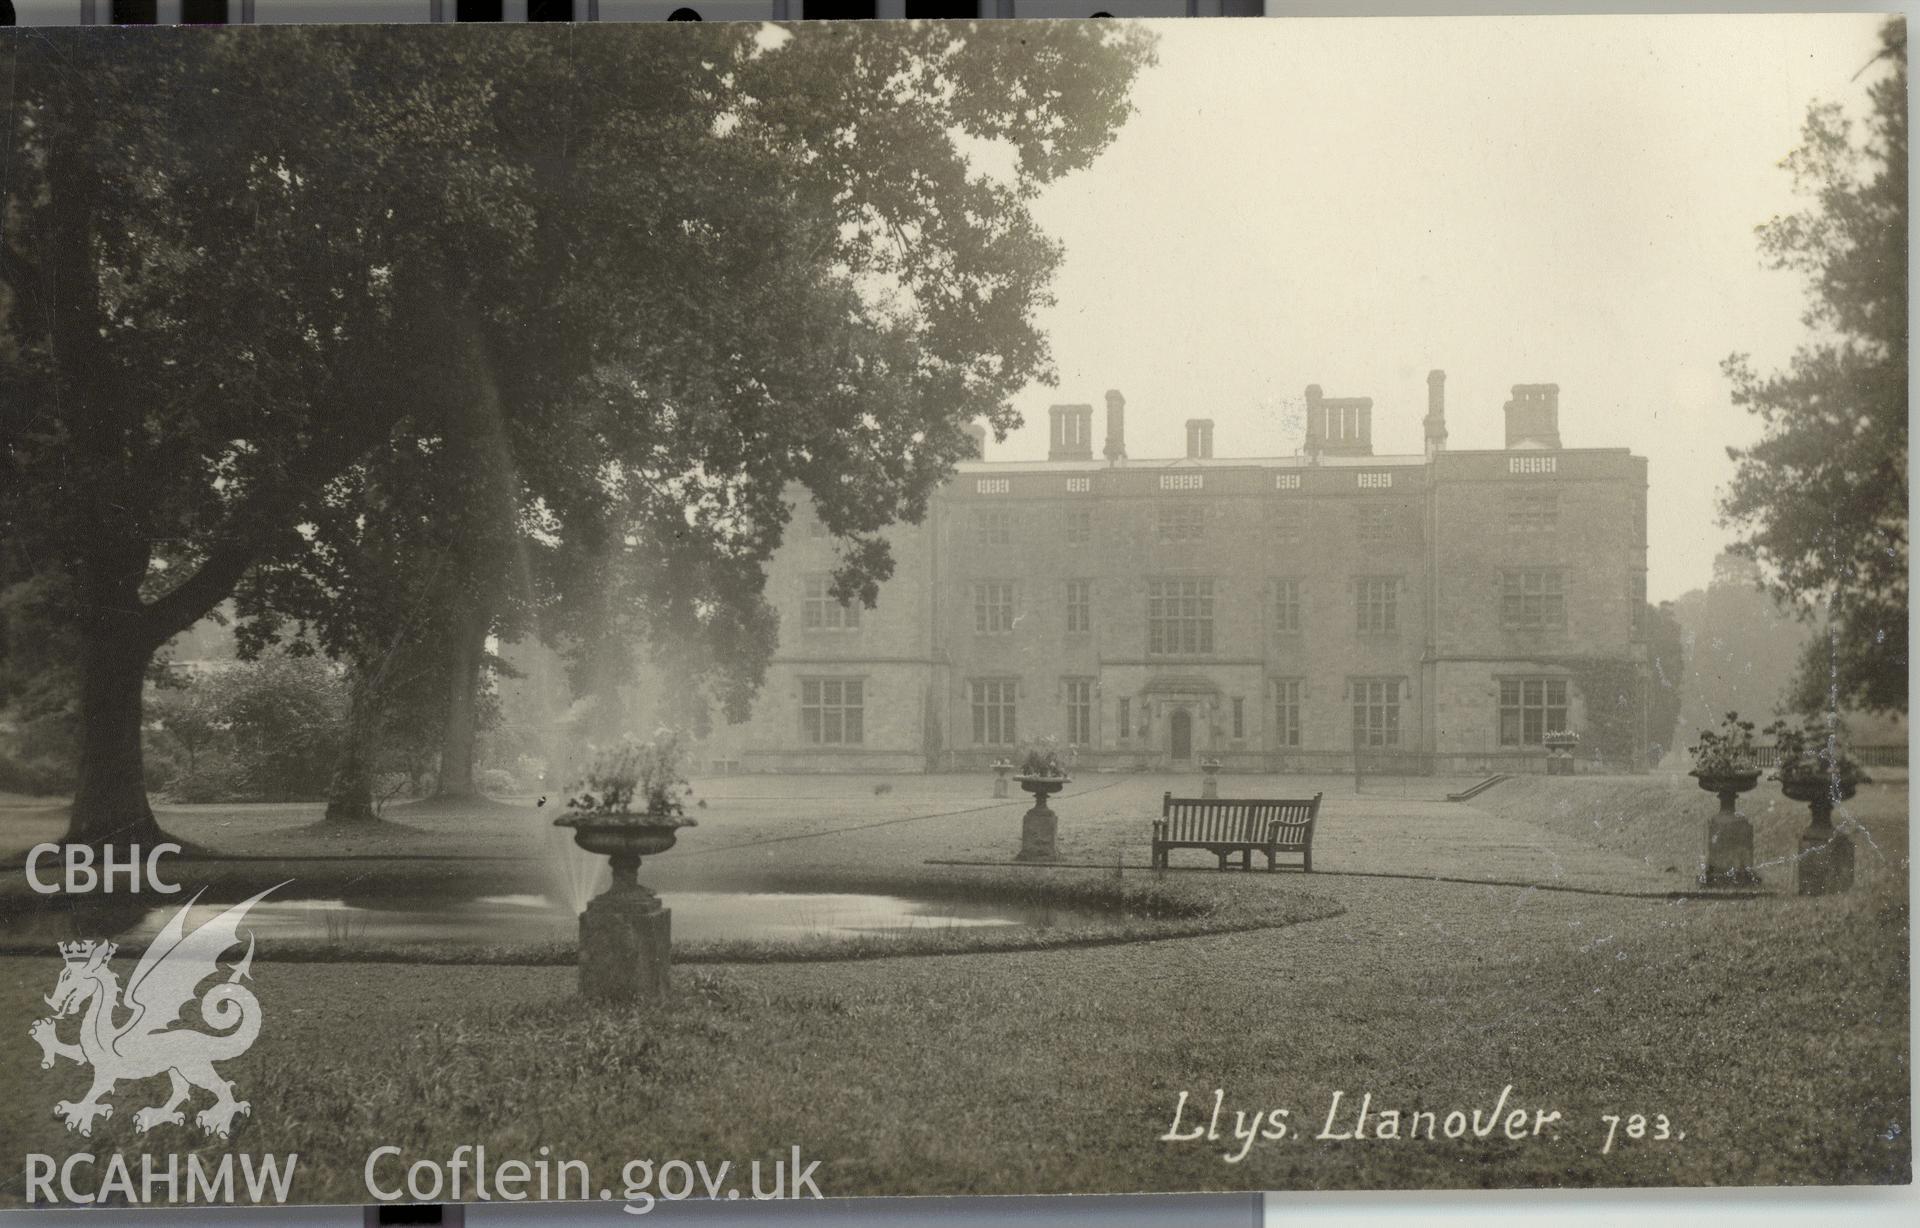 Digitised postcard image of Llanover House, Llanover, with fountain and garden urns. Produced by Parks and Gardens Data Services, from an original item in the Peter Davis Collection at Parks and Gardens UK. We hold only web-resolution images of this collection, suitable for viewing on screen and for research purposes only. We do not hold the original images, or publication quality scans.